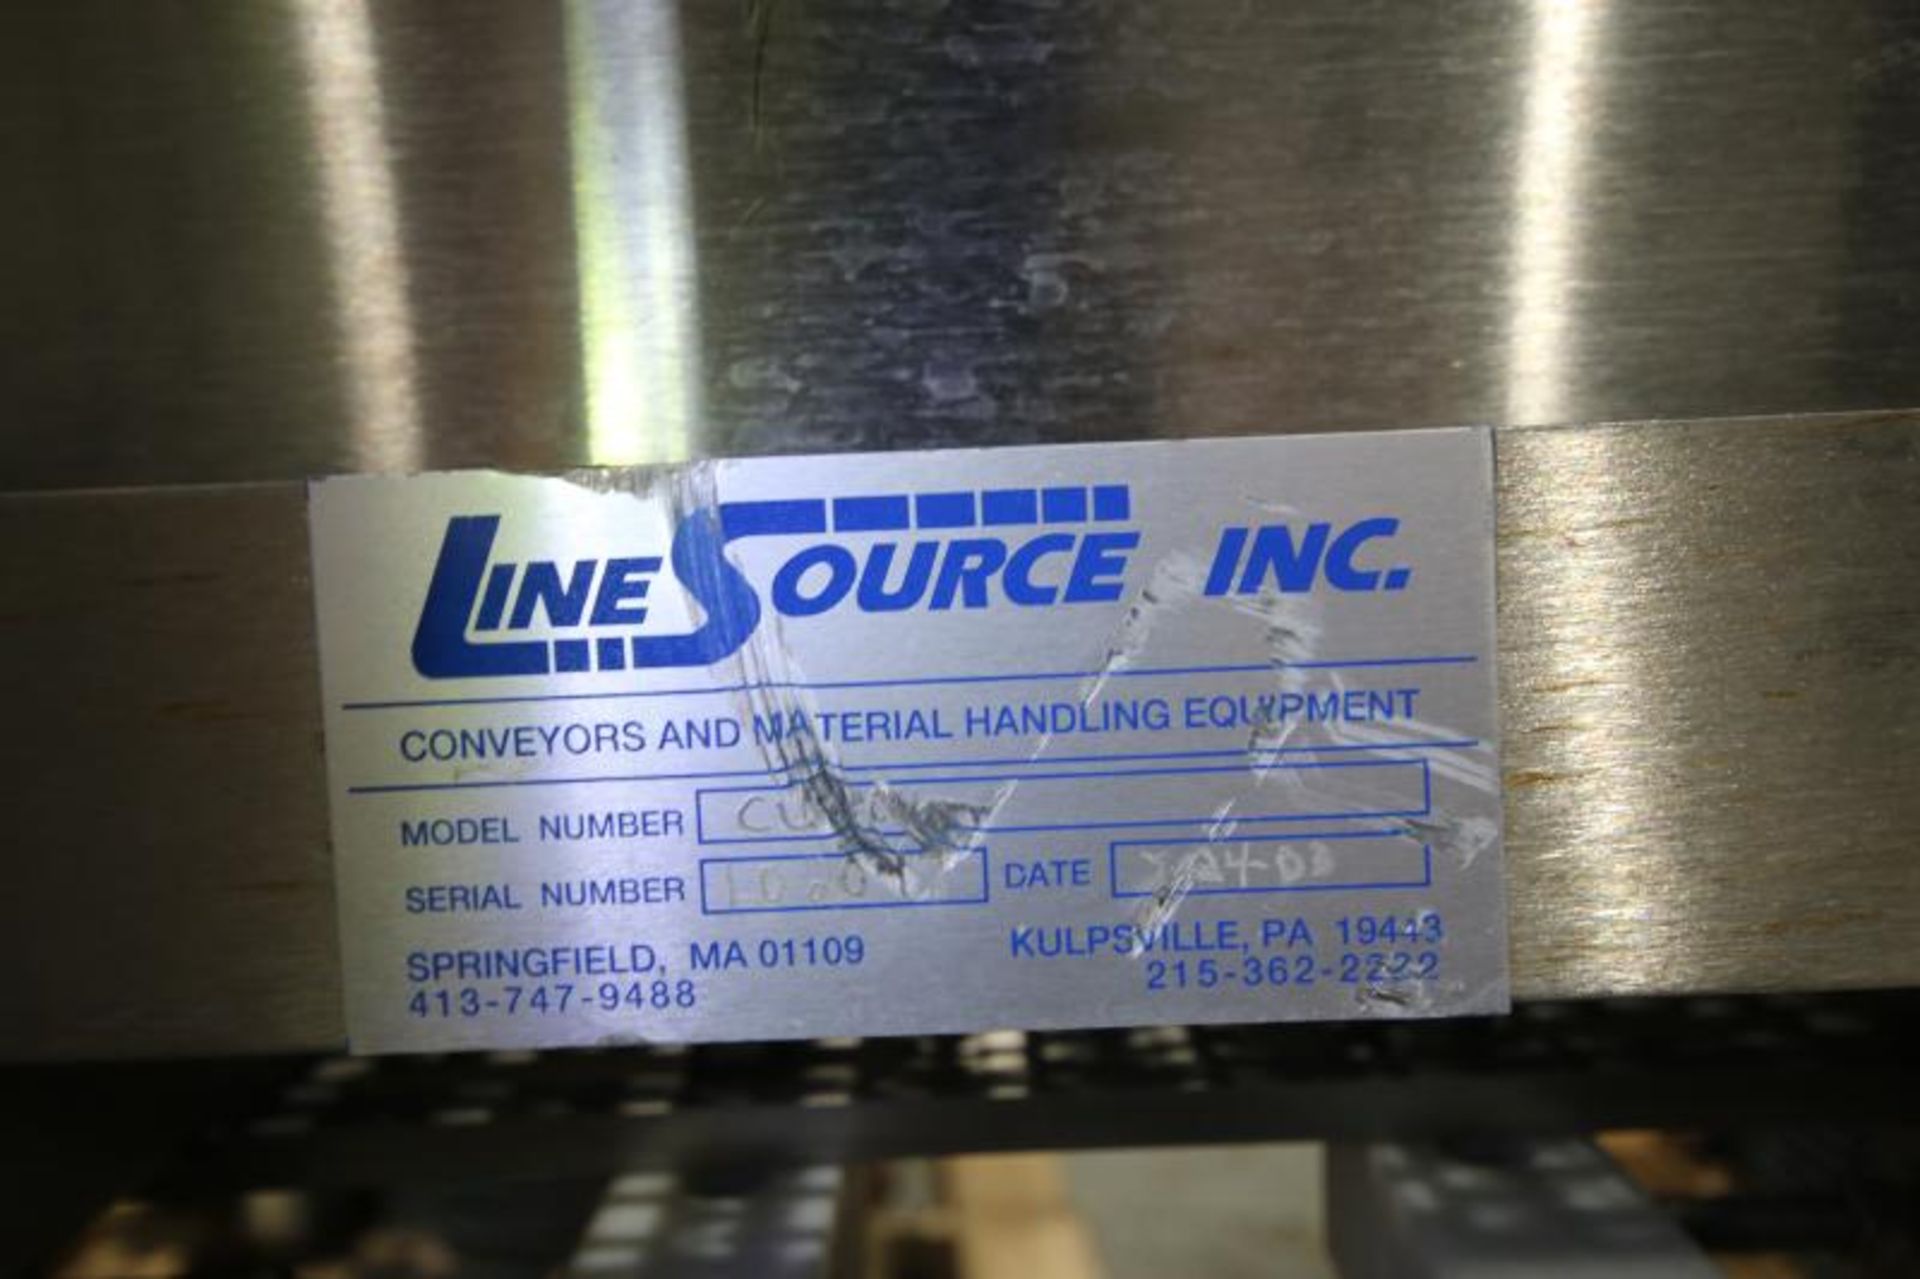 Line Source 7 ft L x 12" W x 25" to 30" H S/S Inclined Conveyor, Model CV8016, SN L02047, with - Image 5 of 5